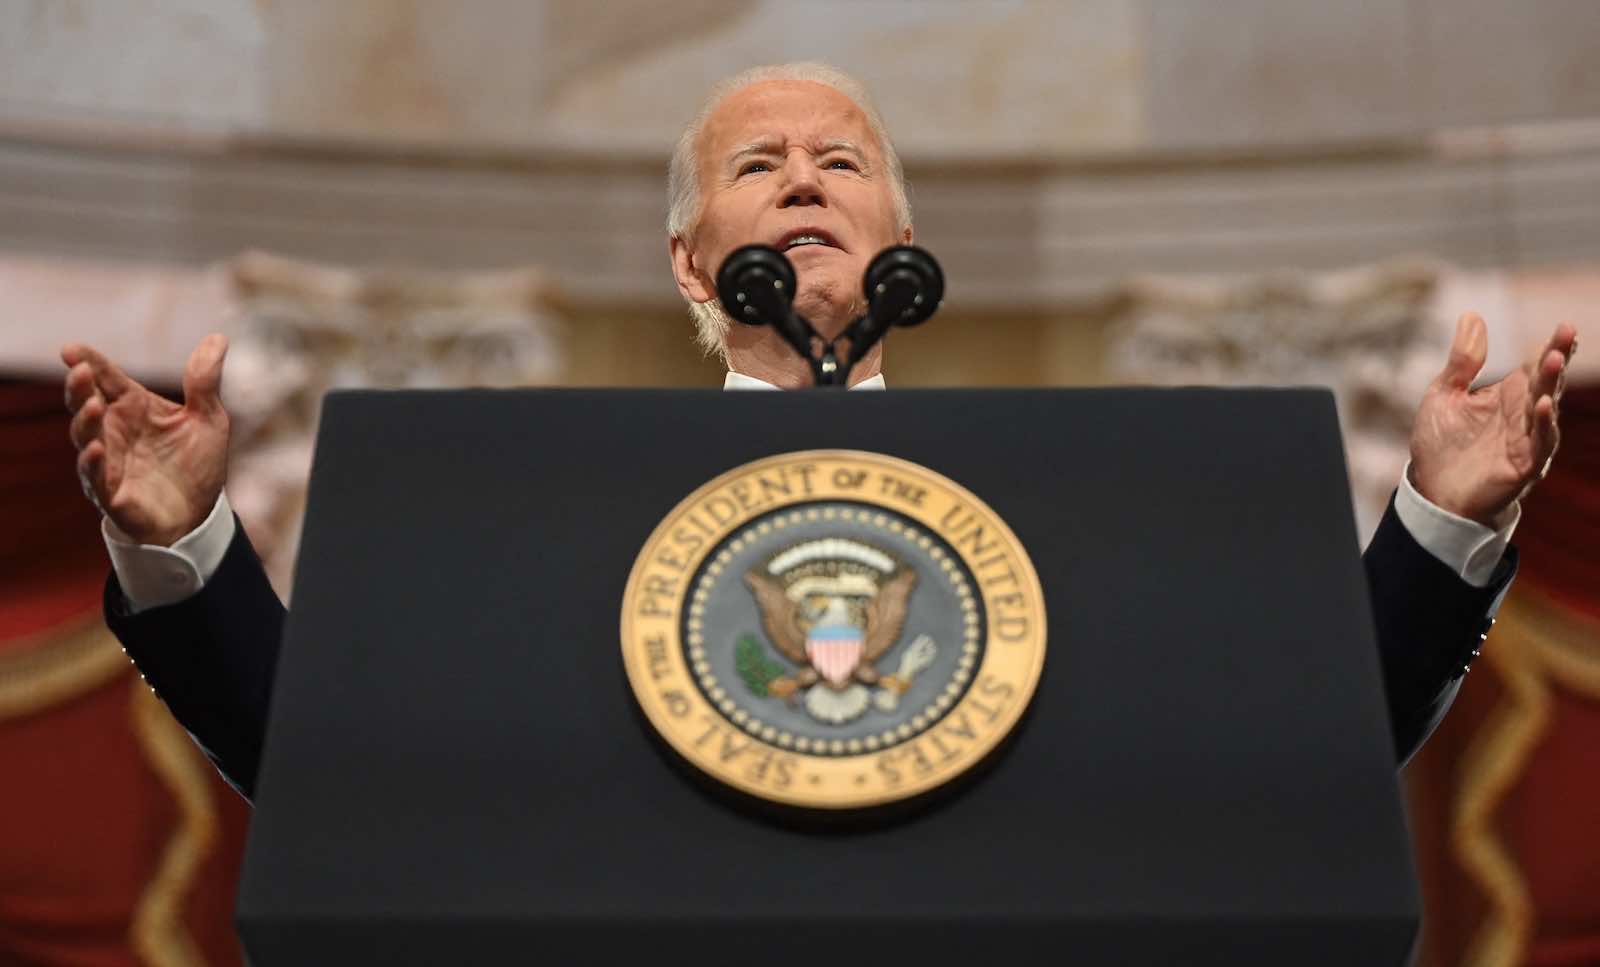 Two hours of “pure, unplugged Joe Biden” offers an insight to his relentless optimism (Jim Watson/AFP via Getty Images)